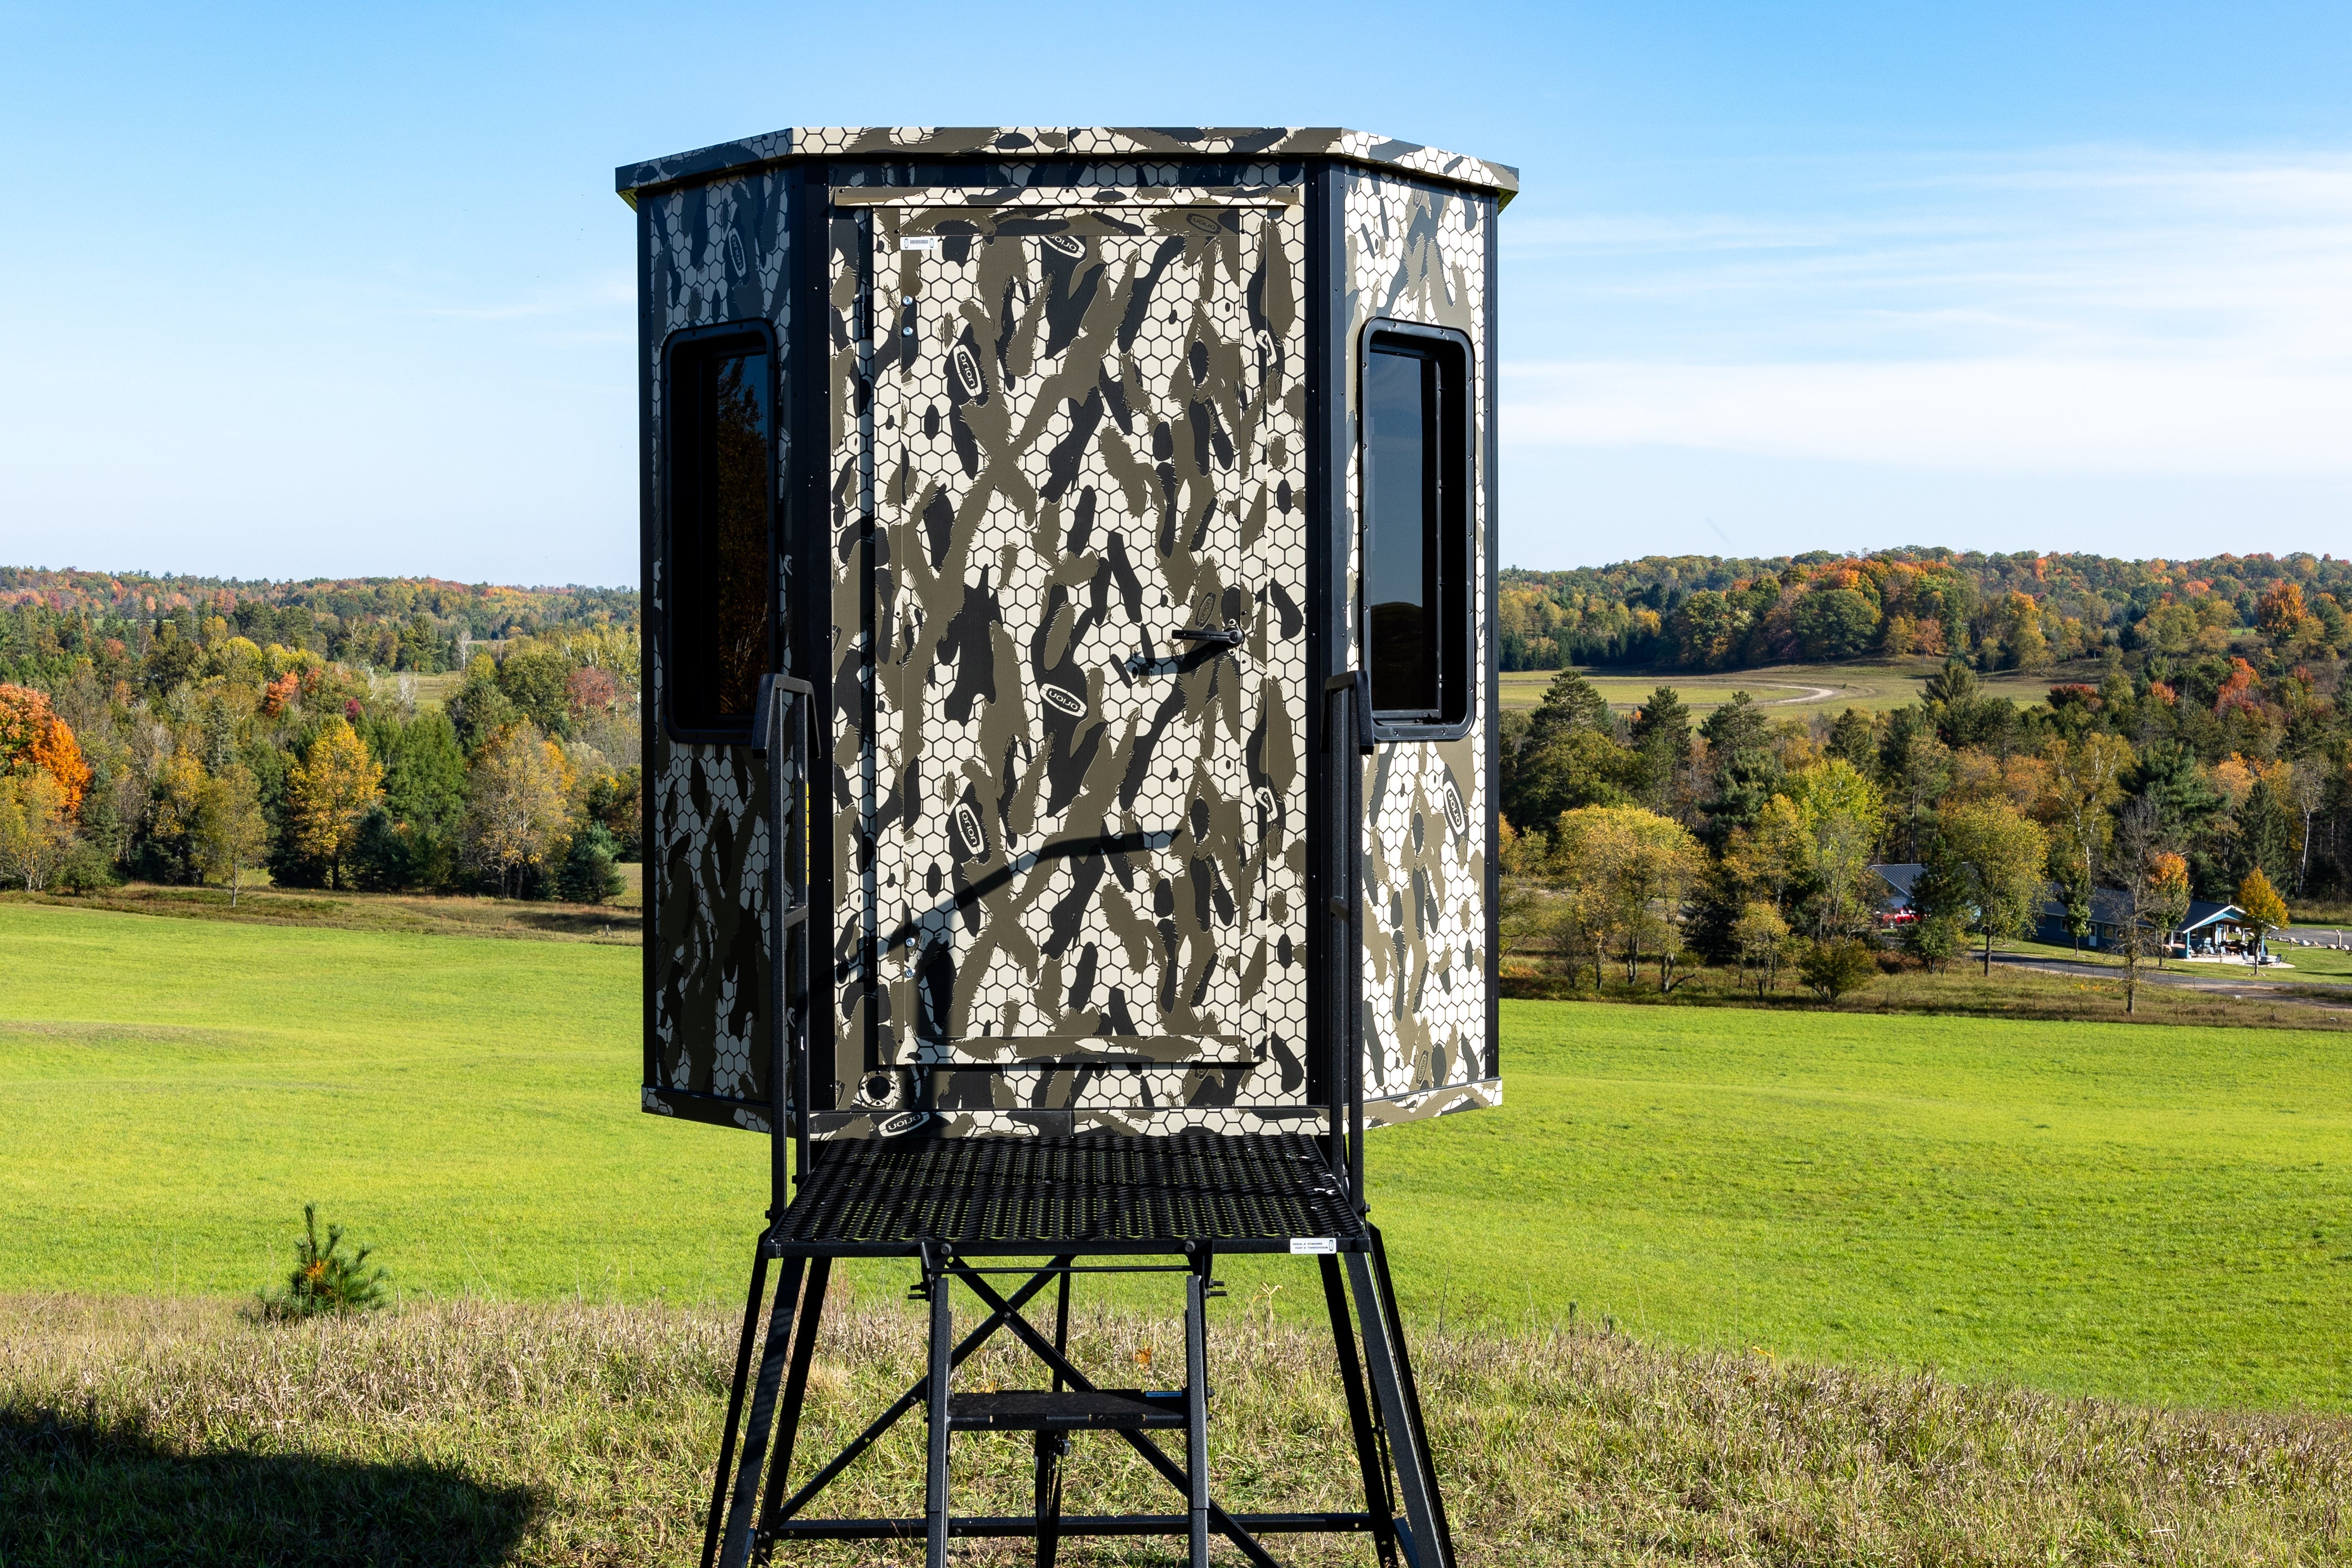 Orion 68T - Modular Deer Hunting Blind with Tinted Windows